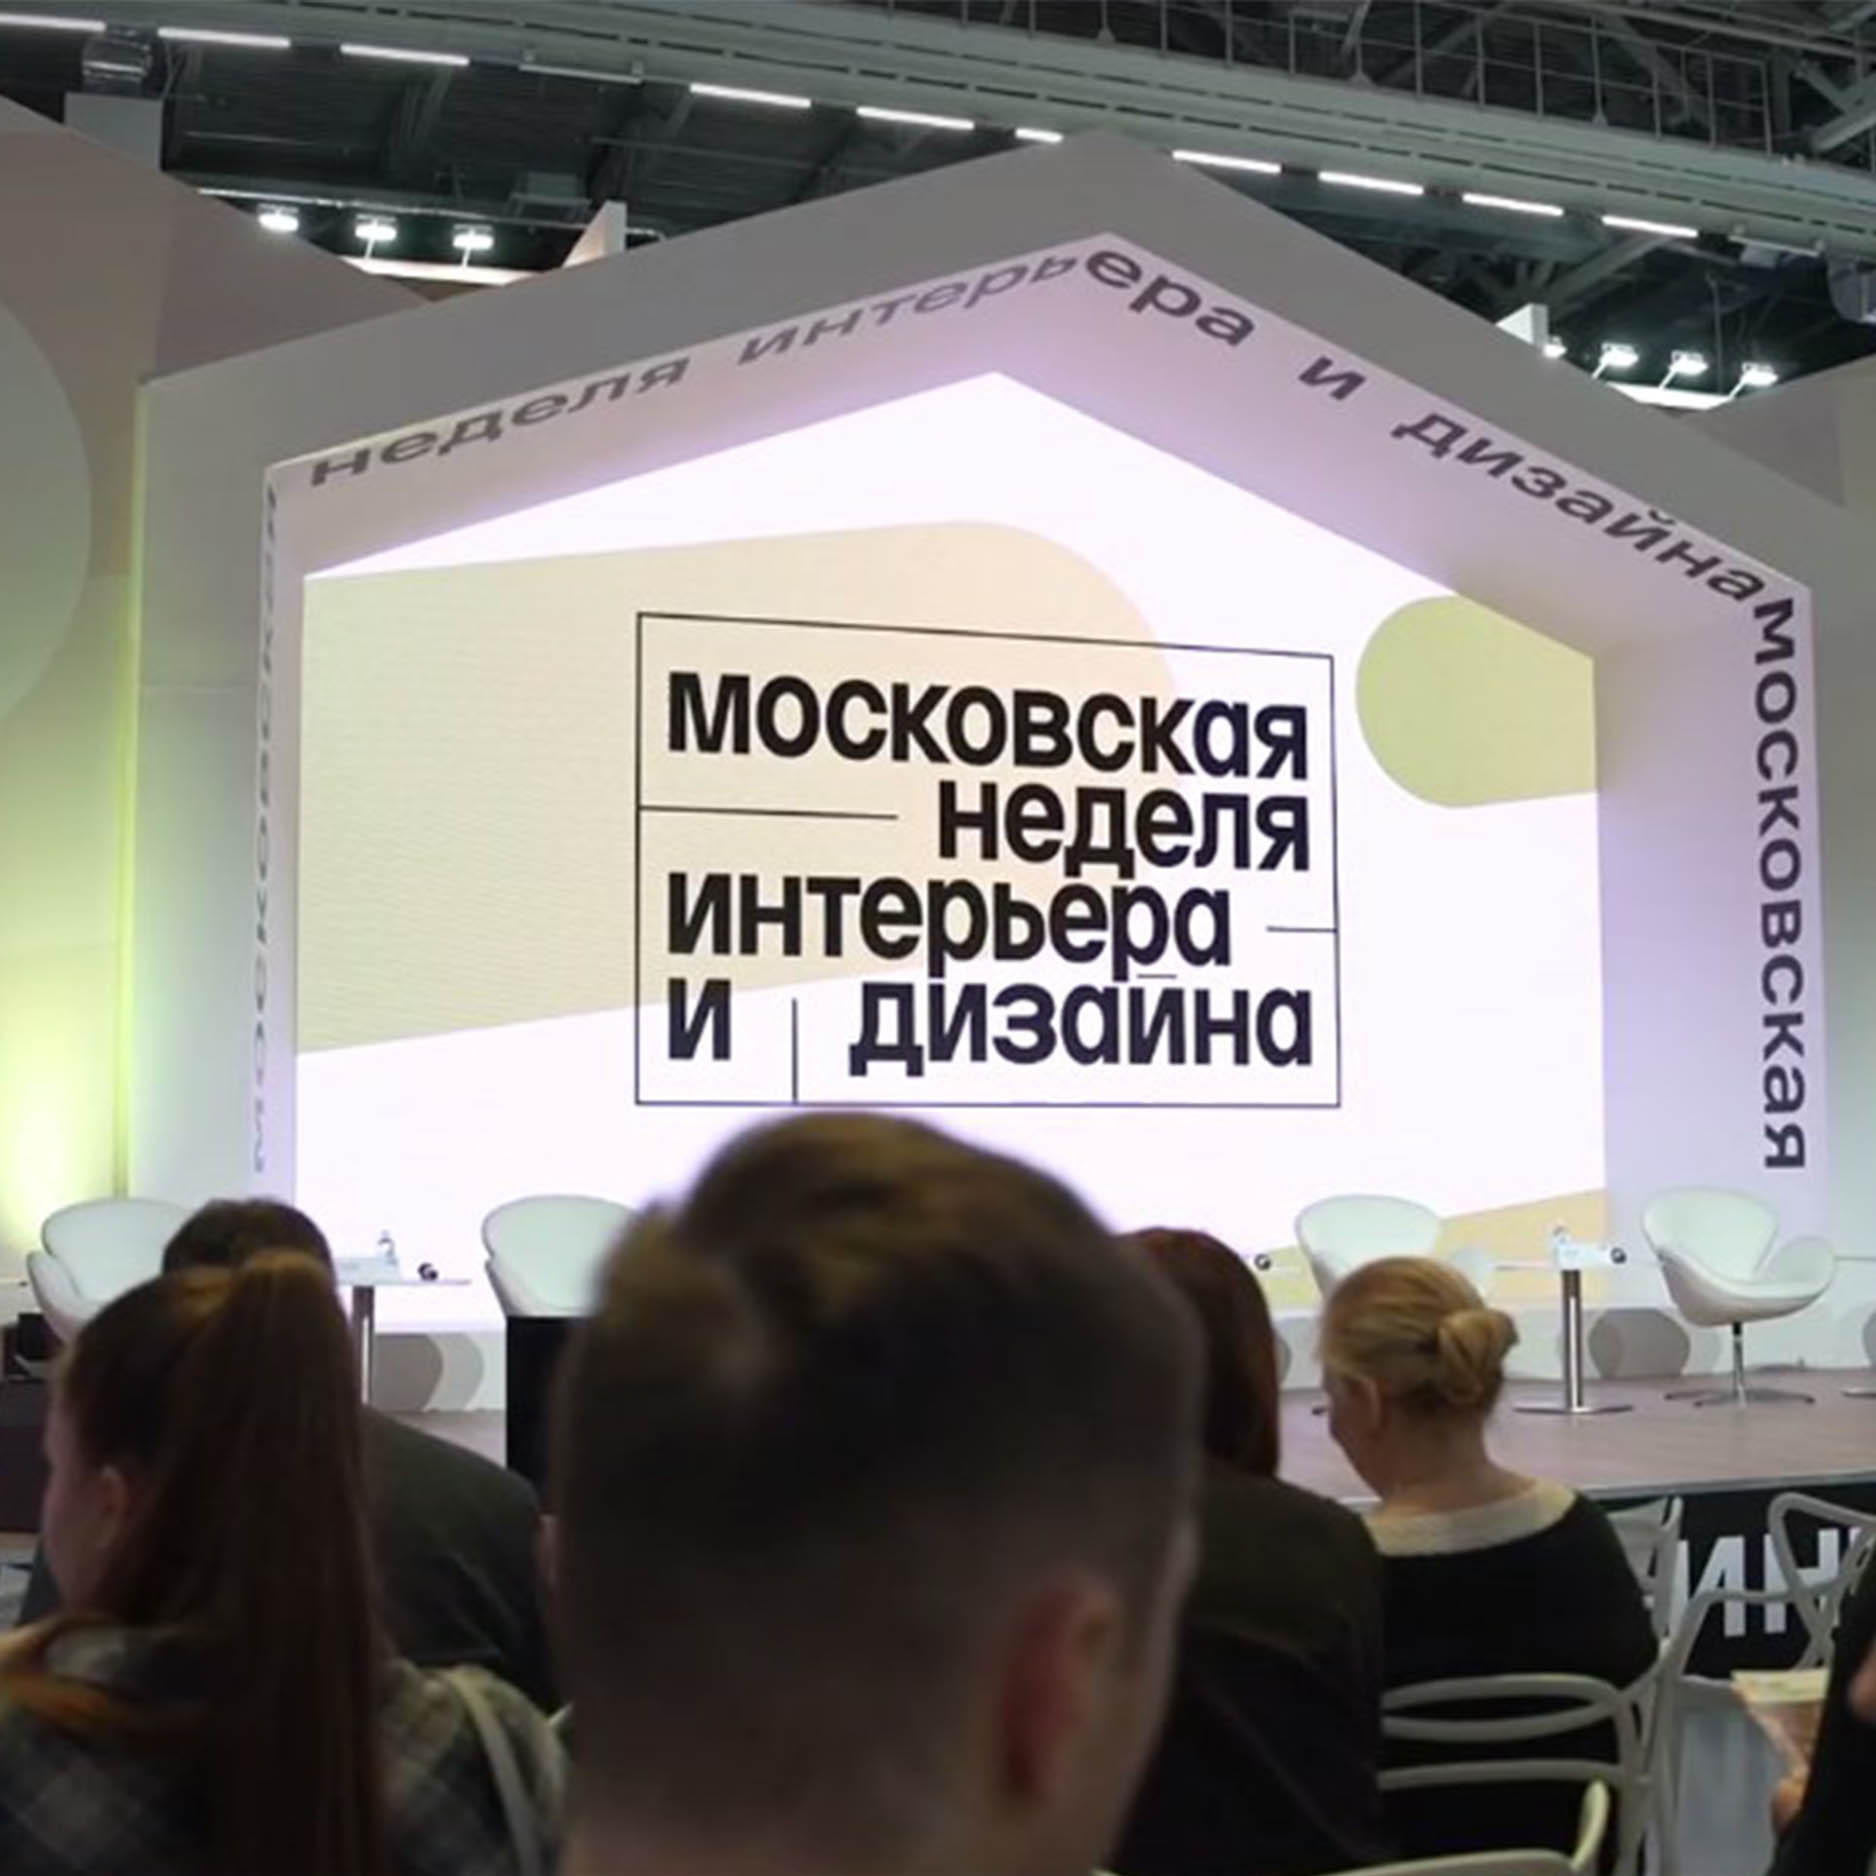 MOSCOW DESIGN WEEK